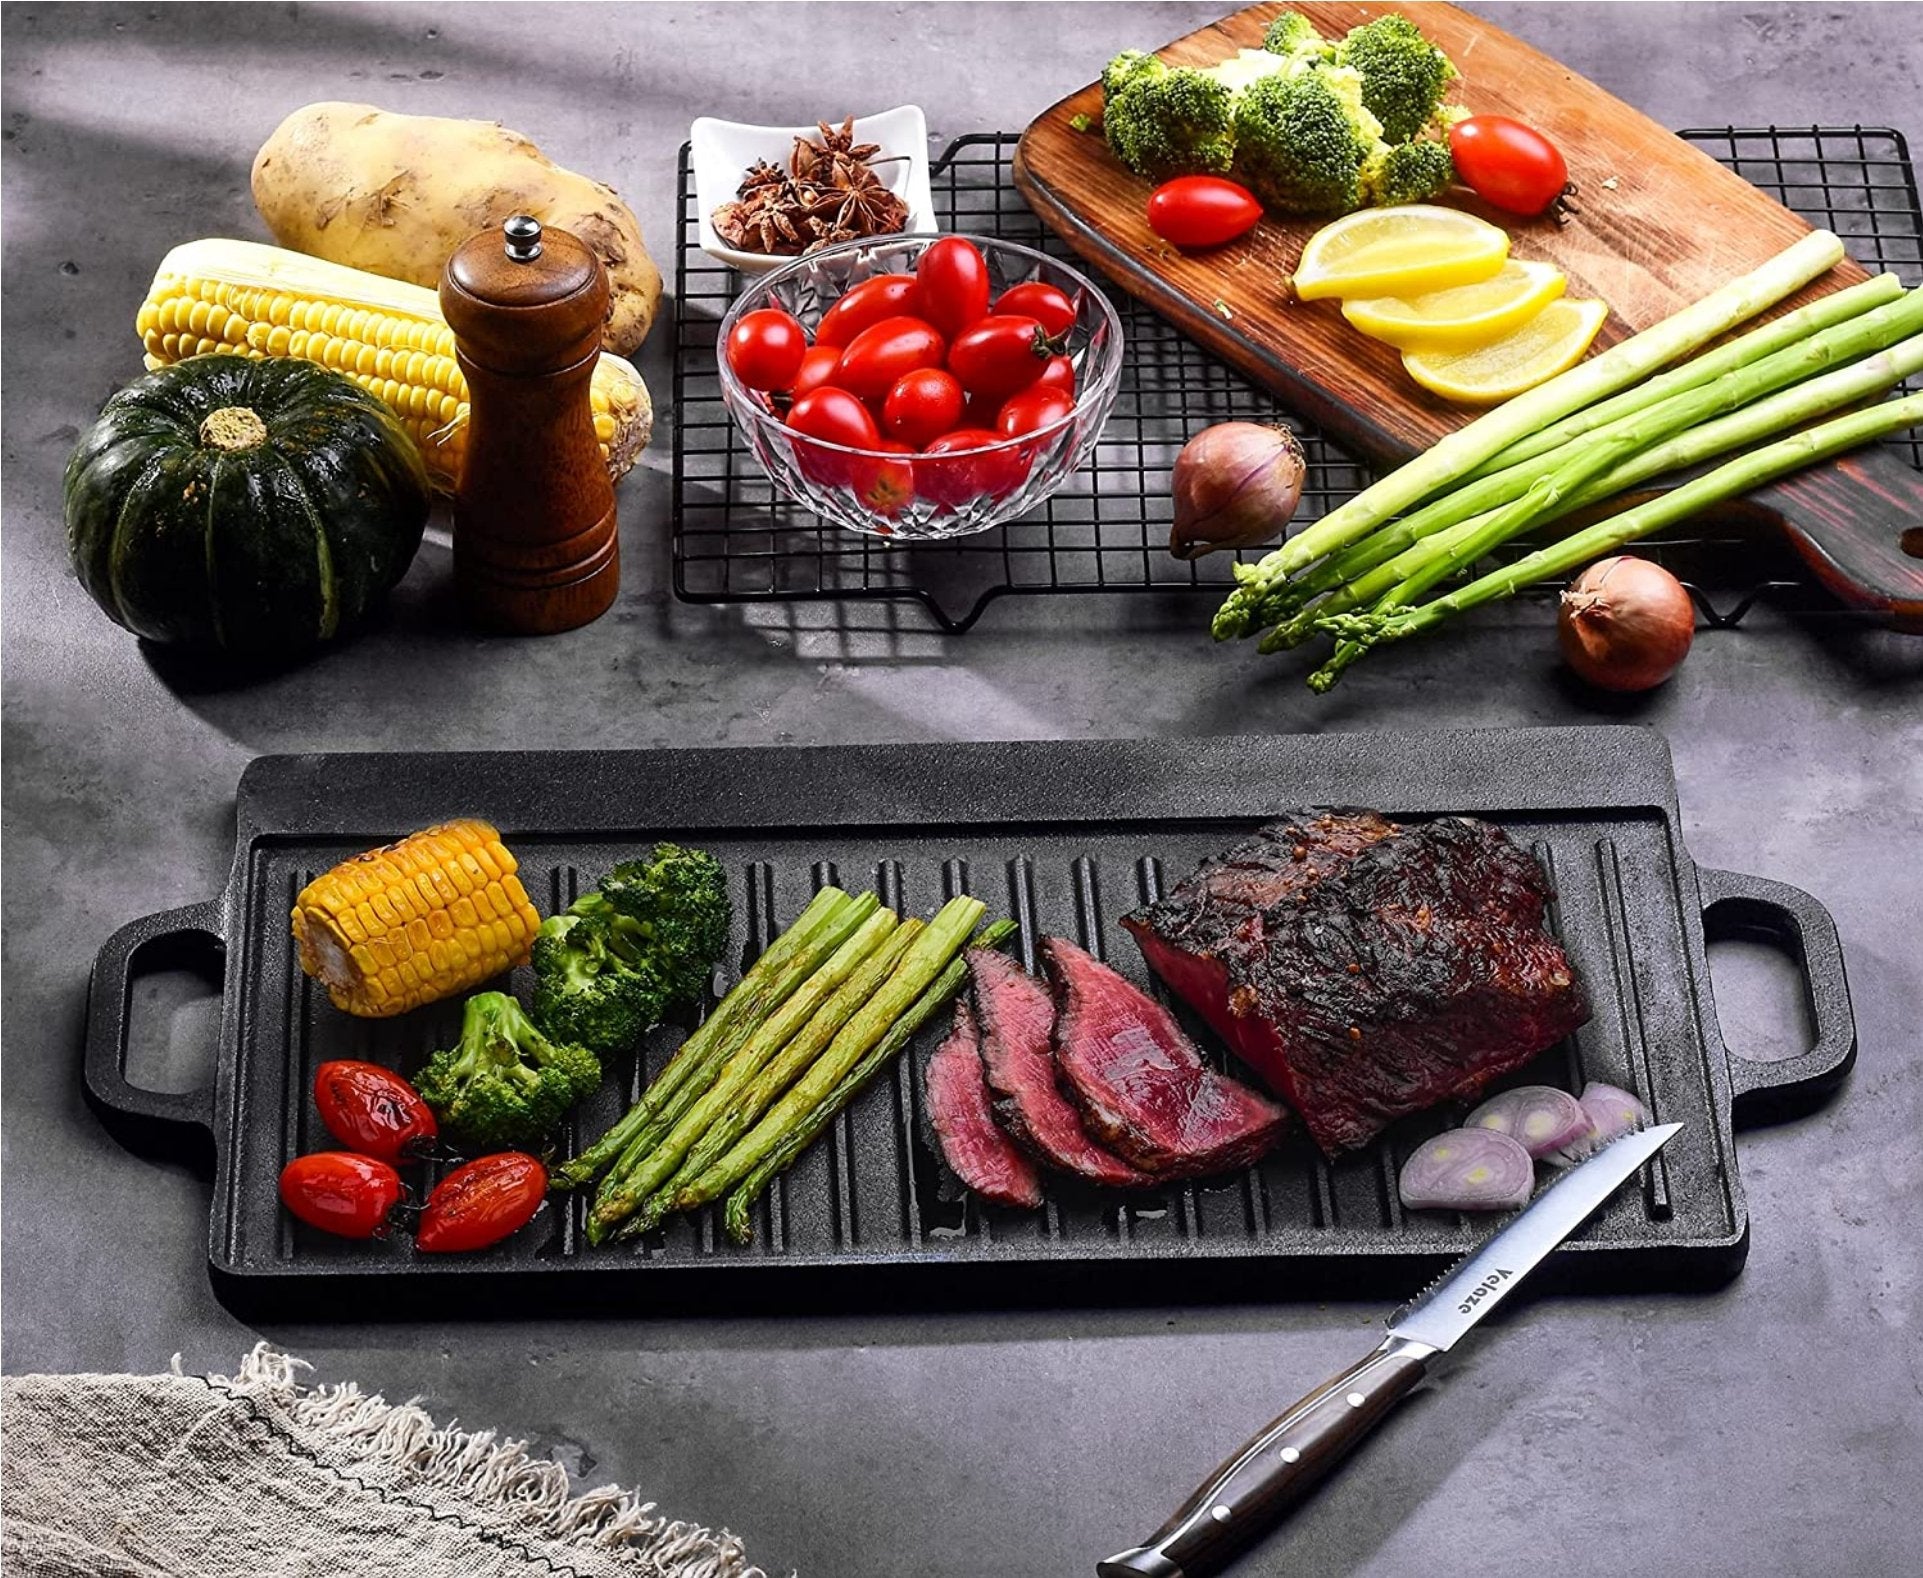 Lifespace Cast Iron Reversible Griddle Pan - Lifespace